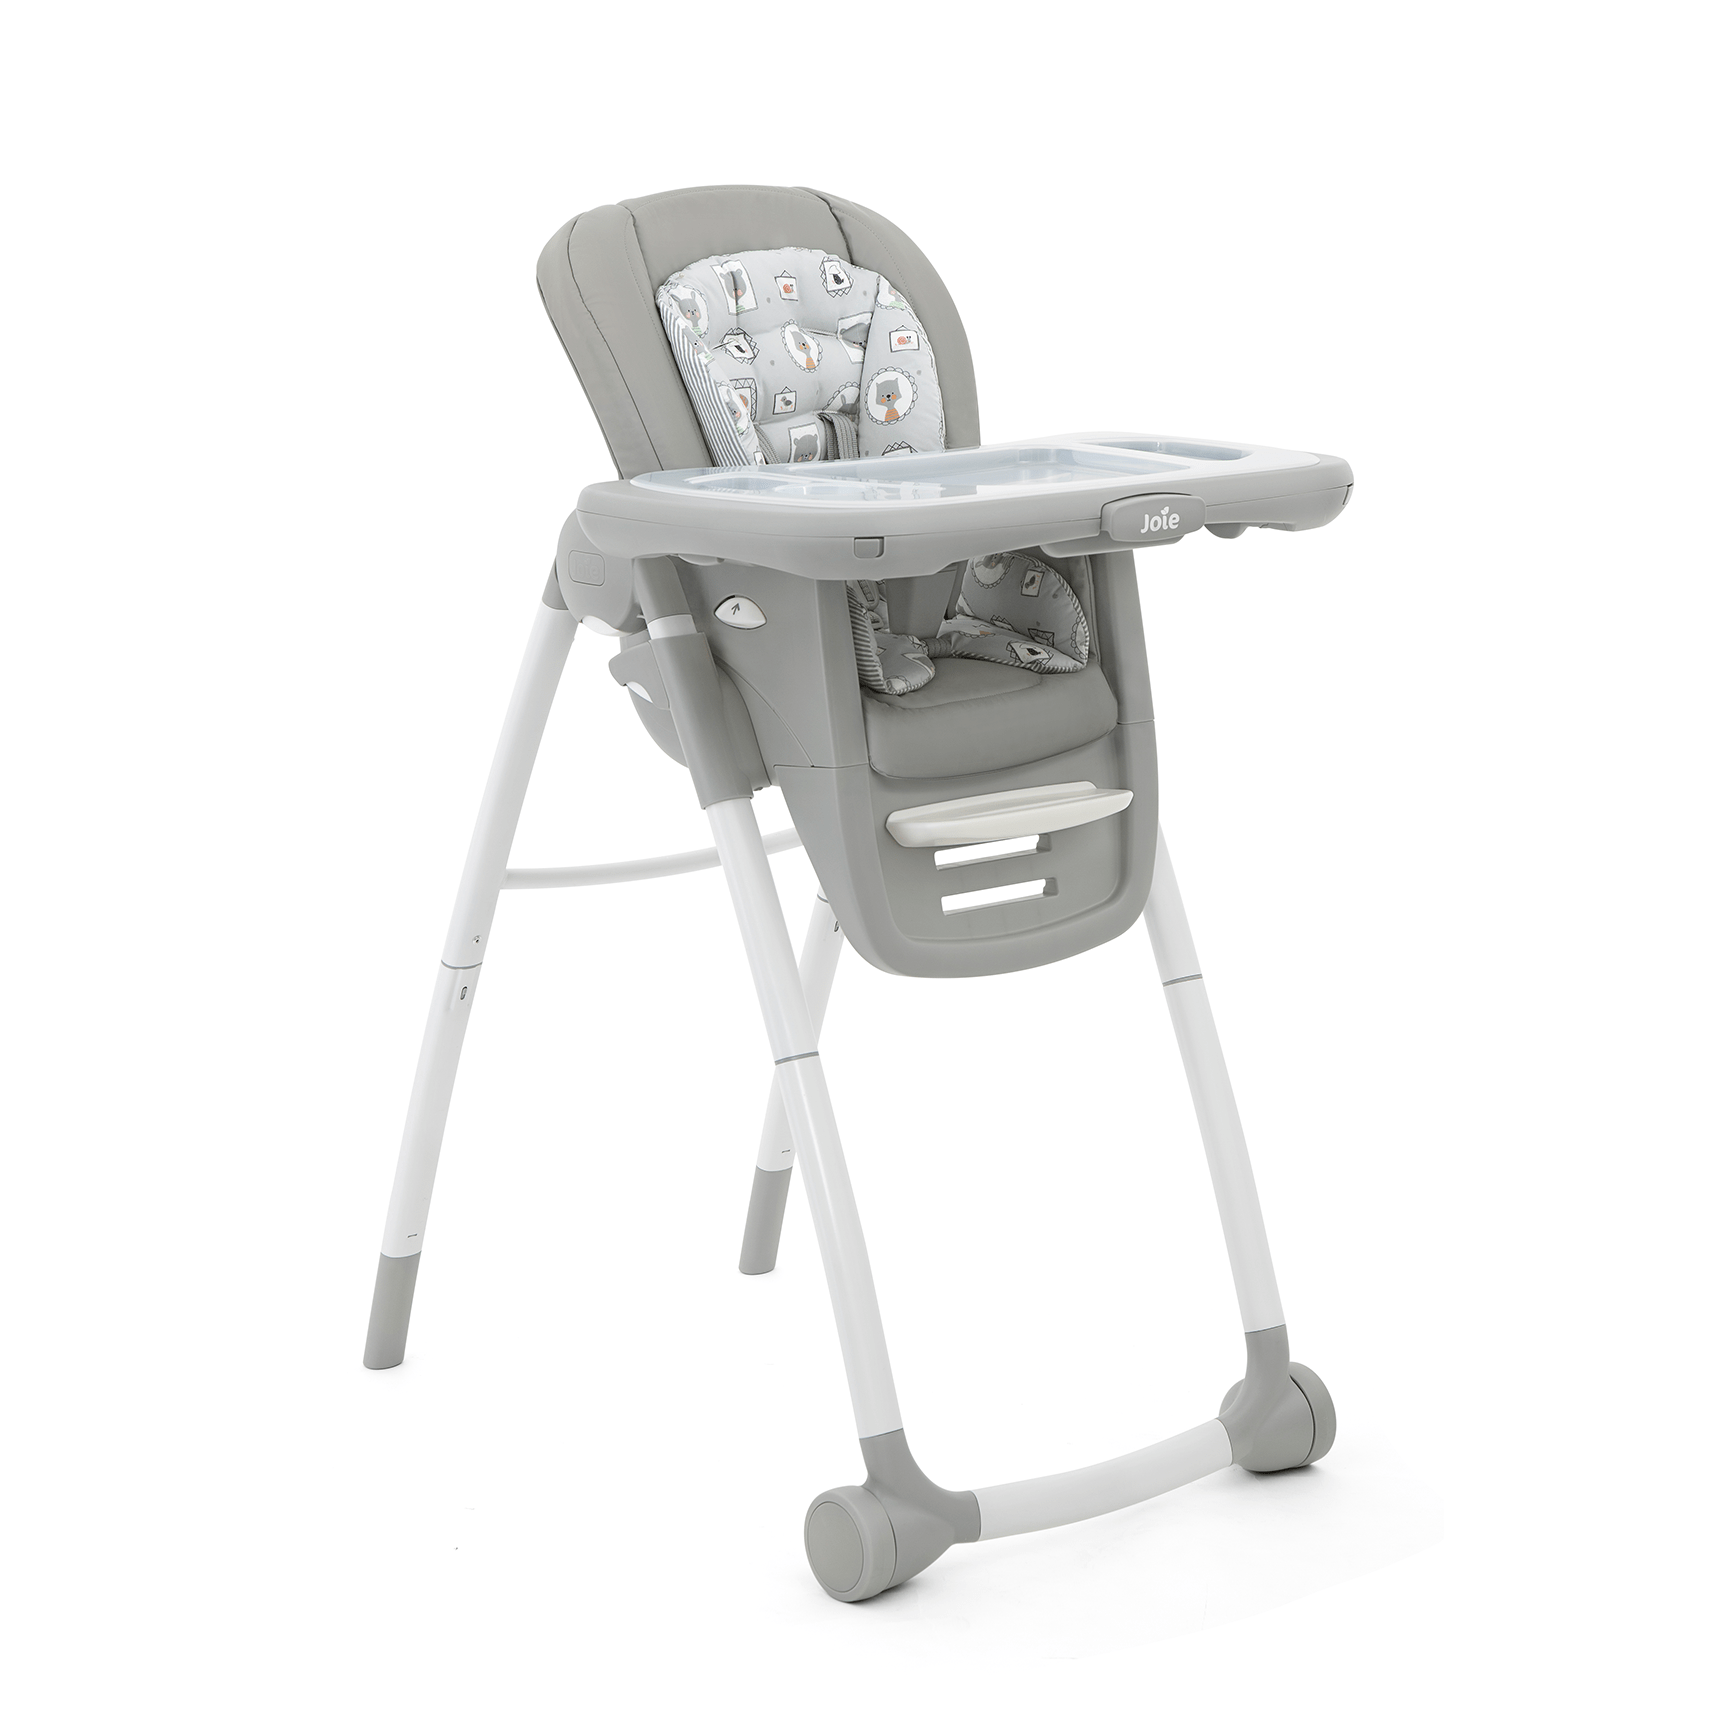 Joie Mimzy Spin Highchair in Mountains 3in1 Geometric